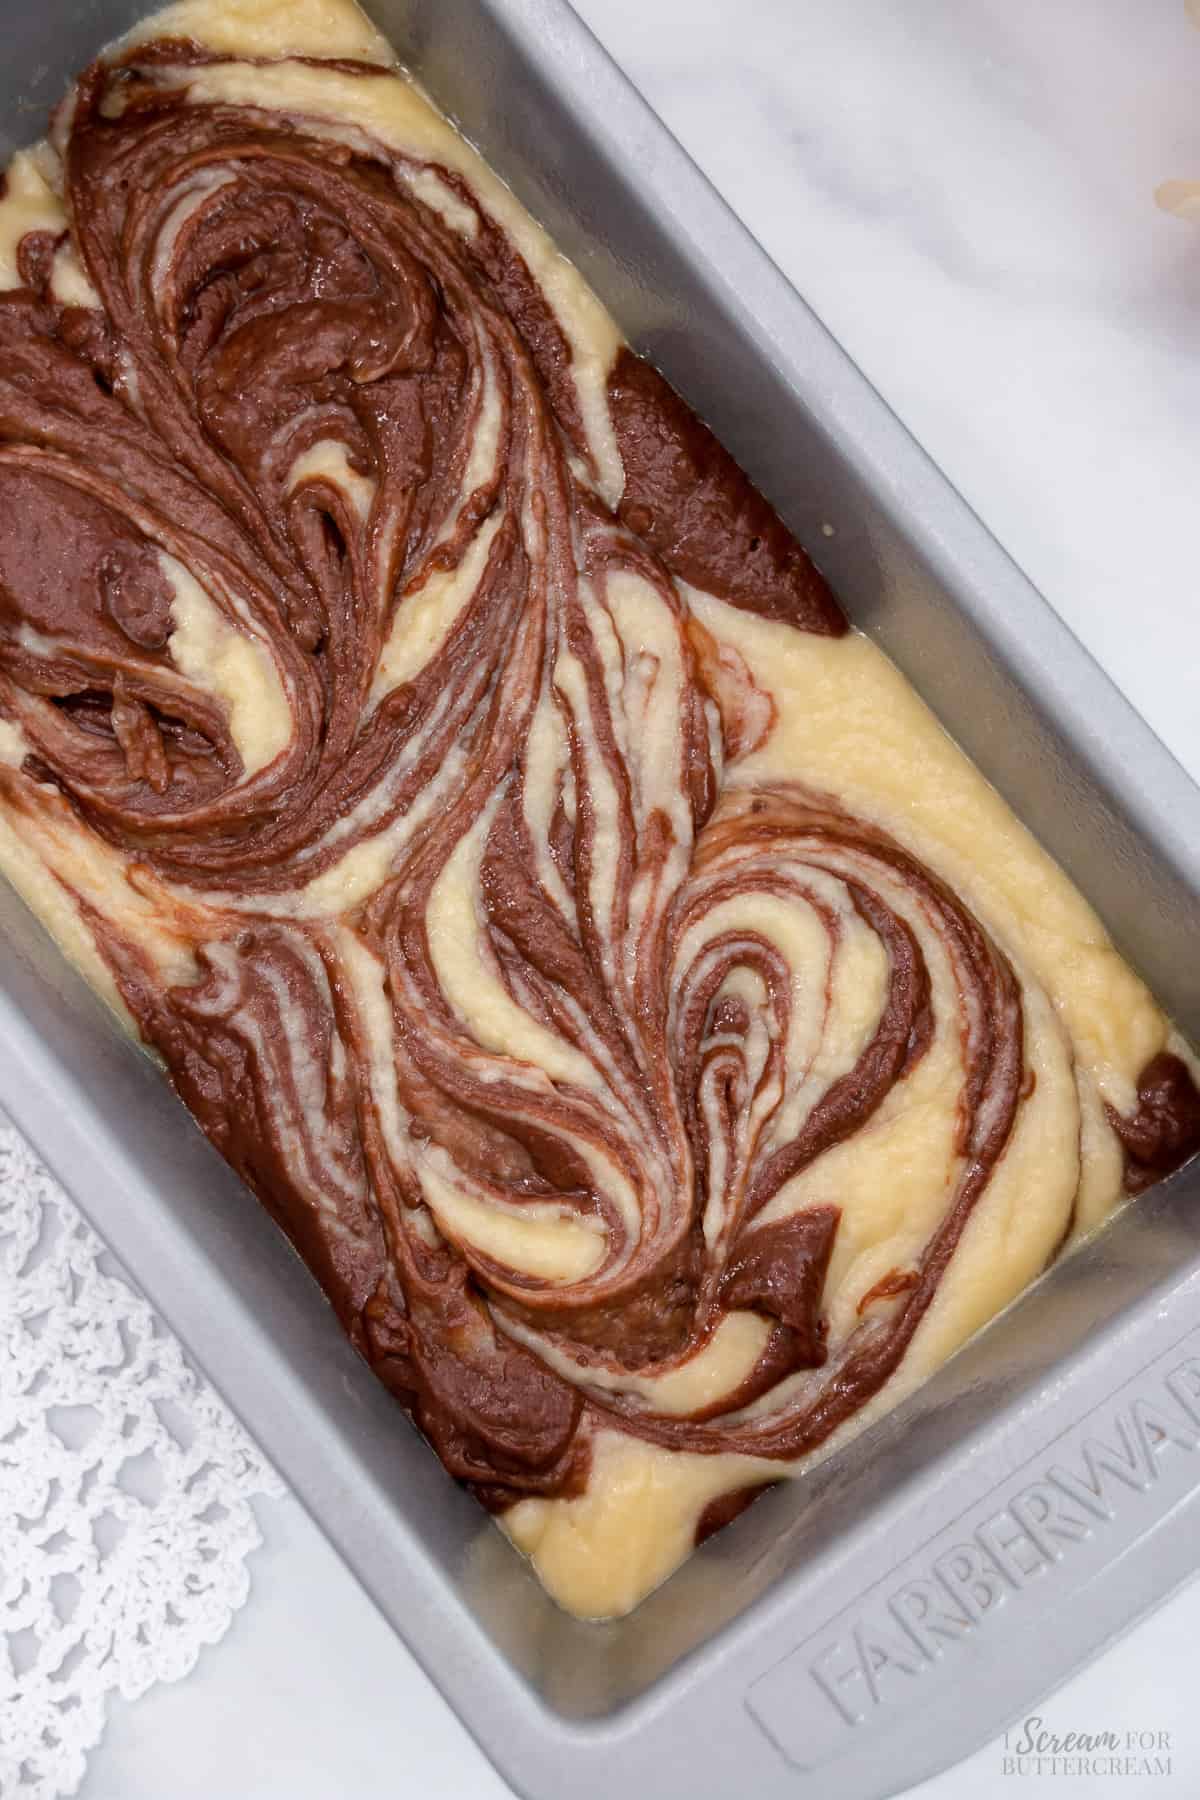 Swirled chocolate and vanilla cake batter in a loaf pan.